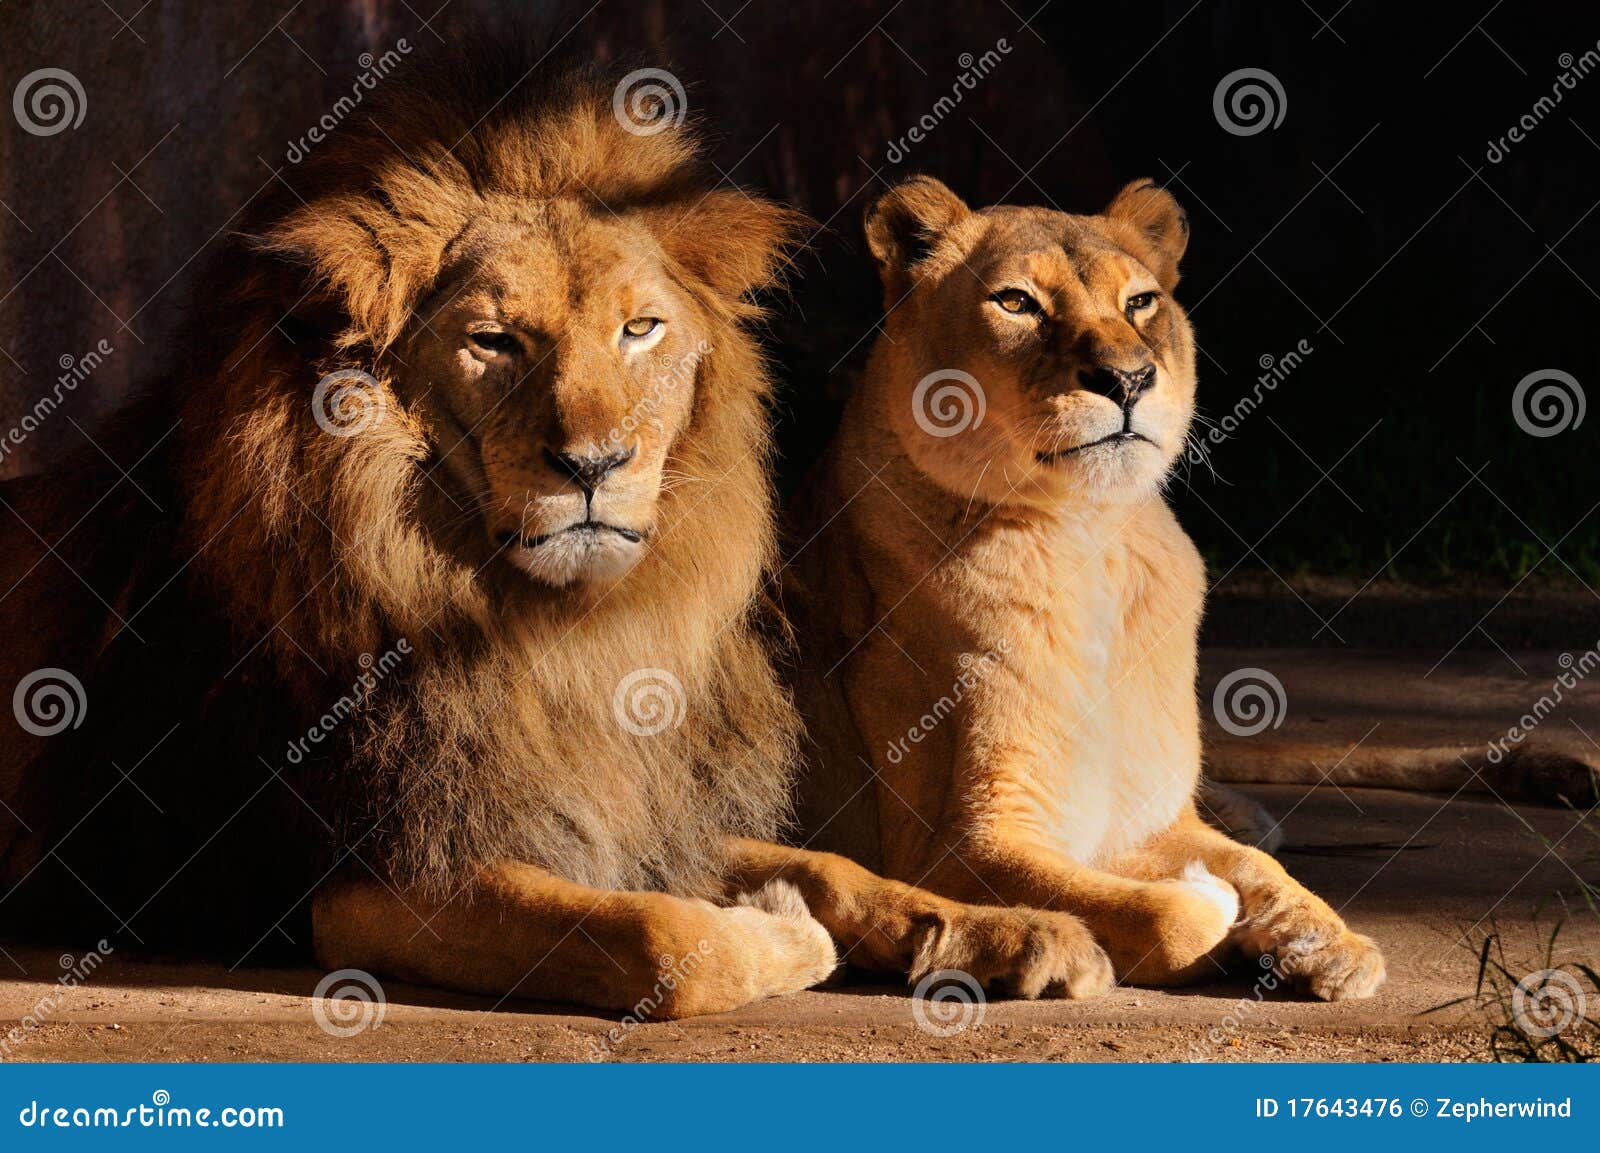 male and female lions resting